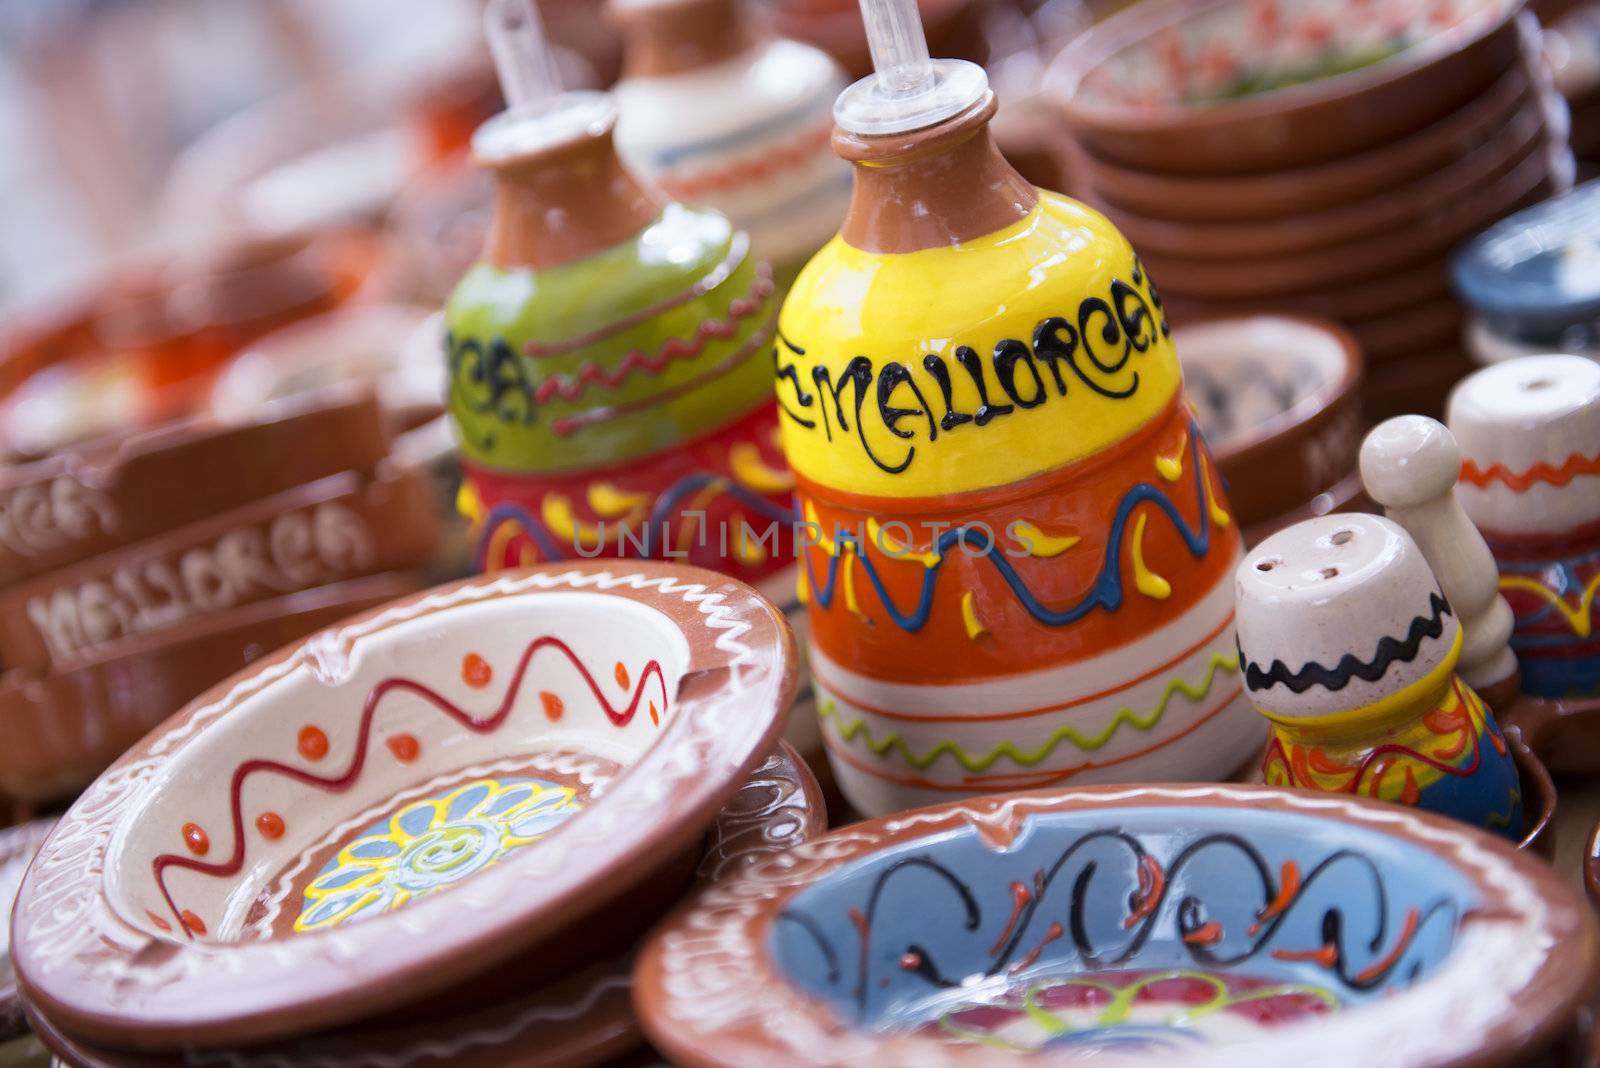 Colorful Ceramic Bowls at the market in Paguera, Mallorca